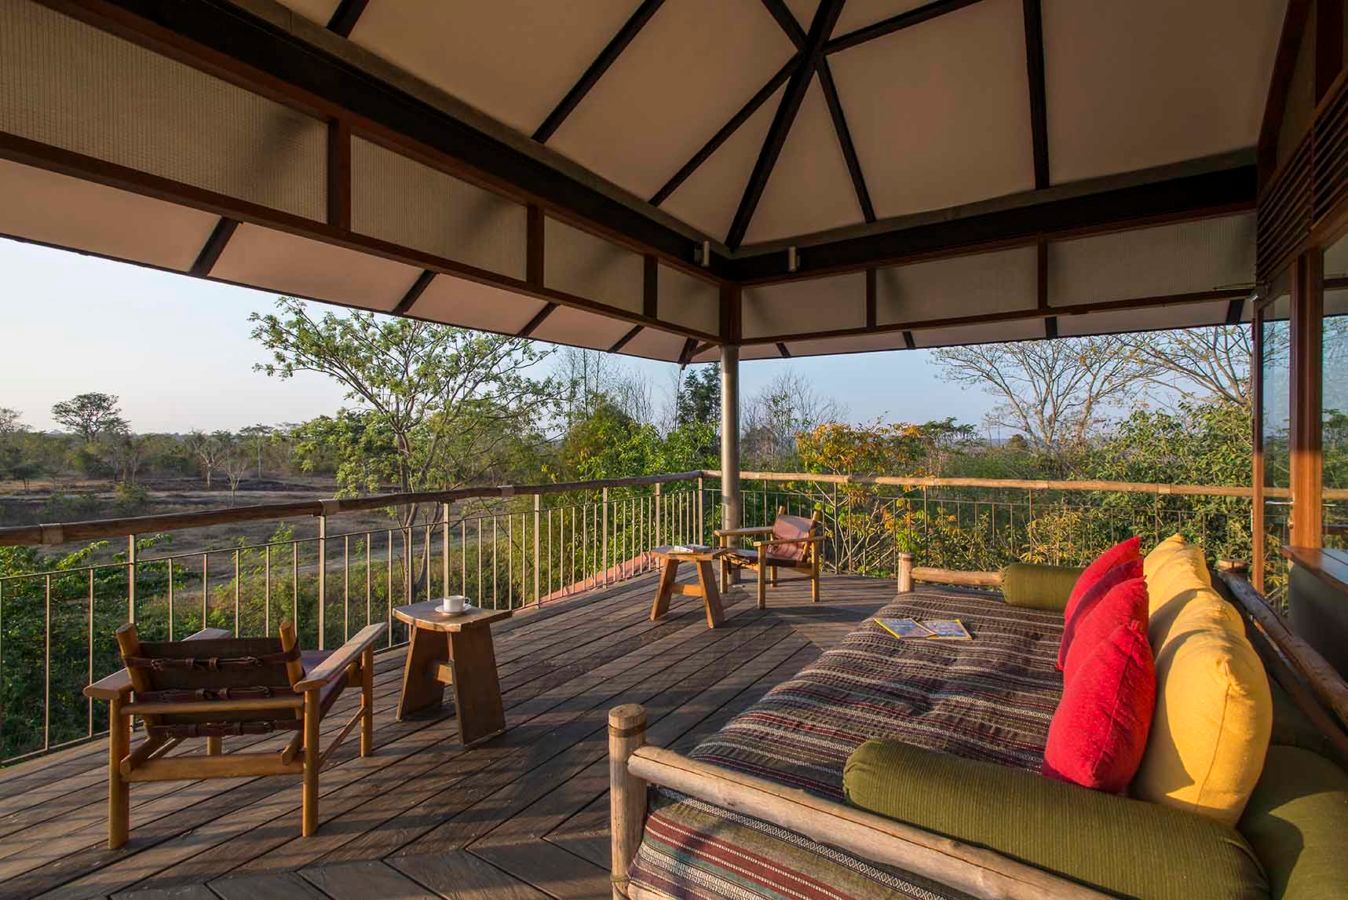 Kaav Safari Lodge in Kabini: An odyssey into the heart of South Indian wilderness